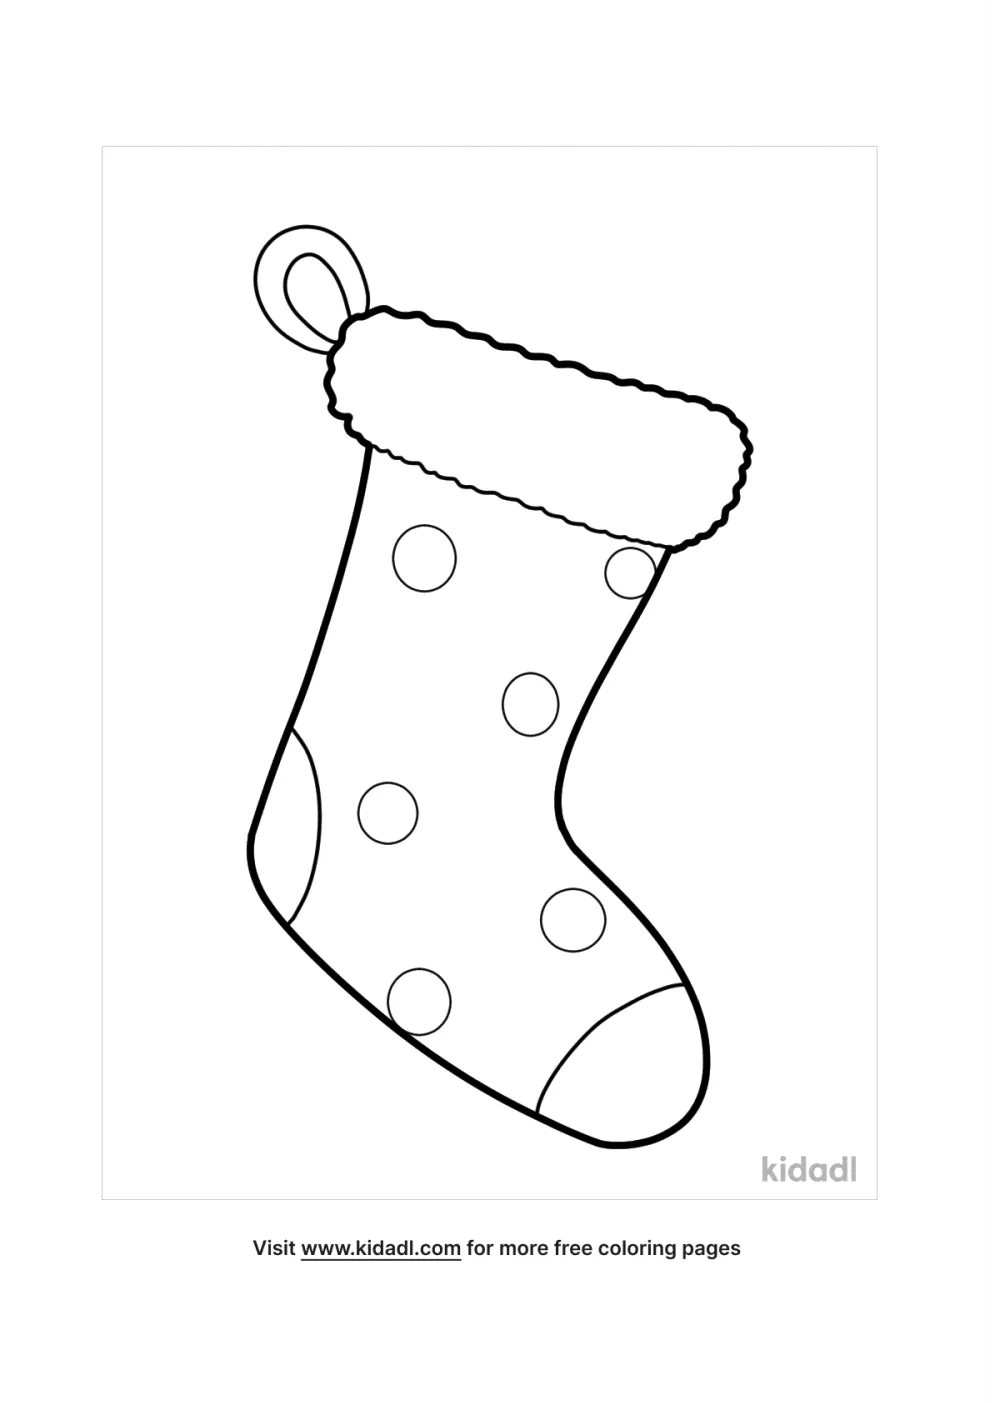 christmas-stocking-coloring-pages-free-christmas-coloring-pages-kidadl